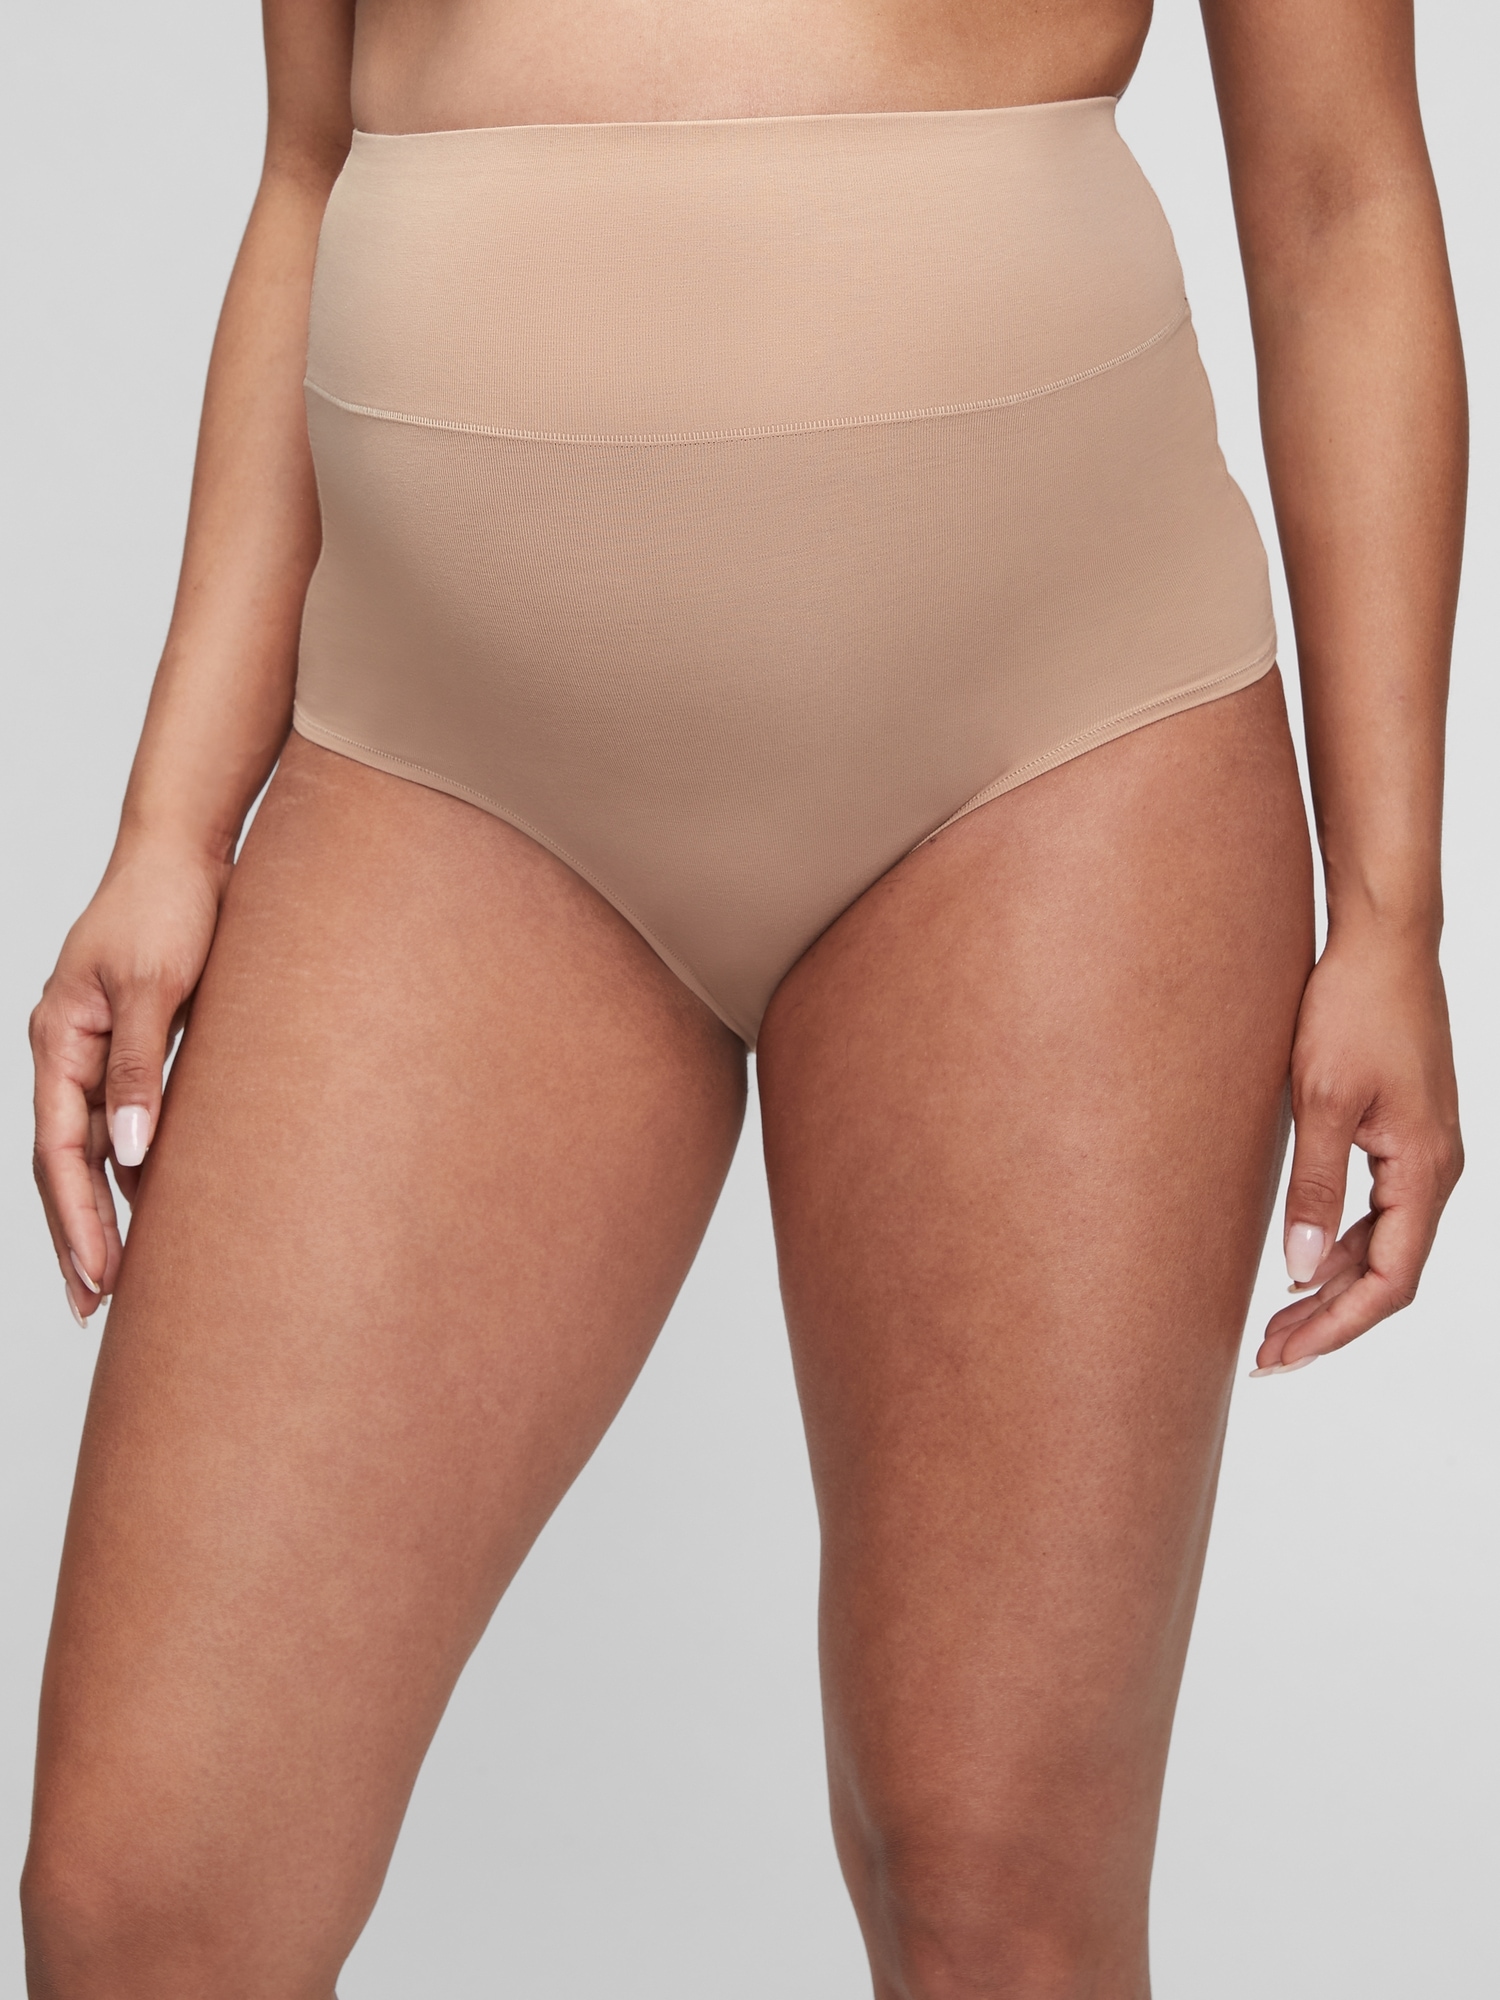 Gap Maternity Extra Support Post-baby Briefs In Cafe Au Lait